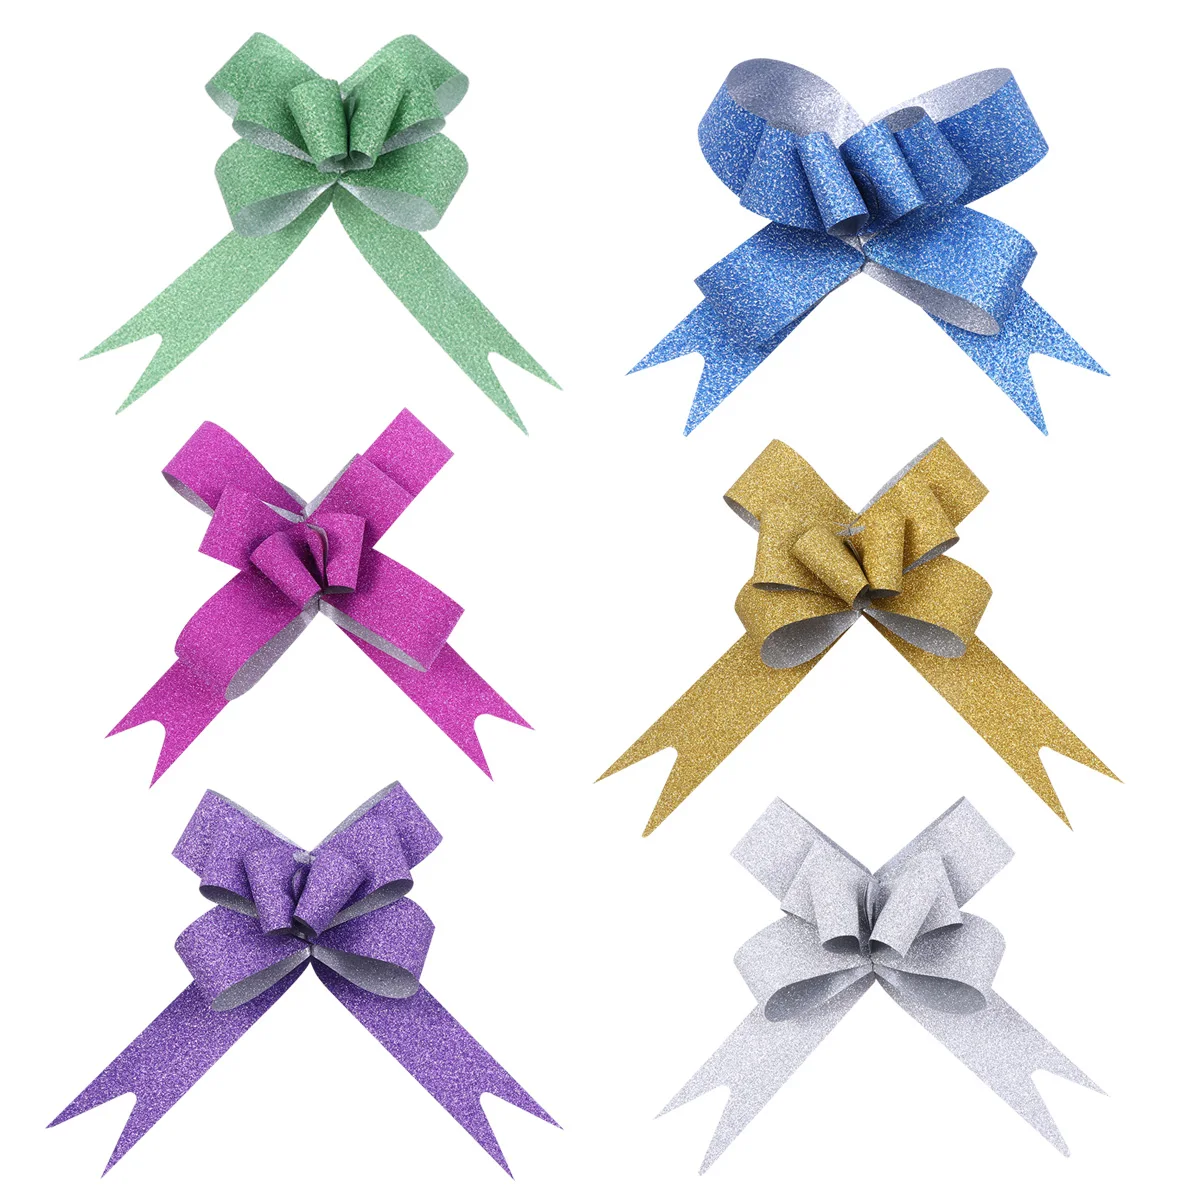 100pcs Pull Bows Gift Knot Ribbons Gift Wrapping Flower Basket Candy